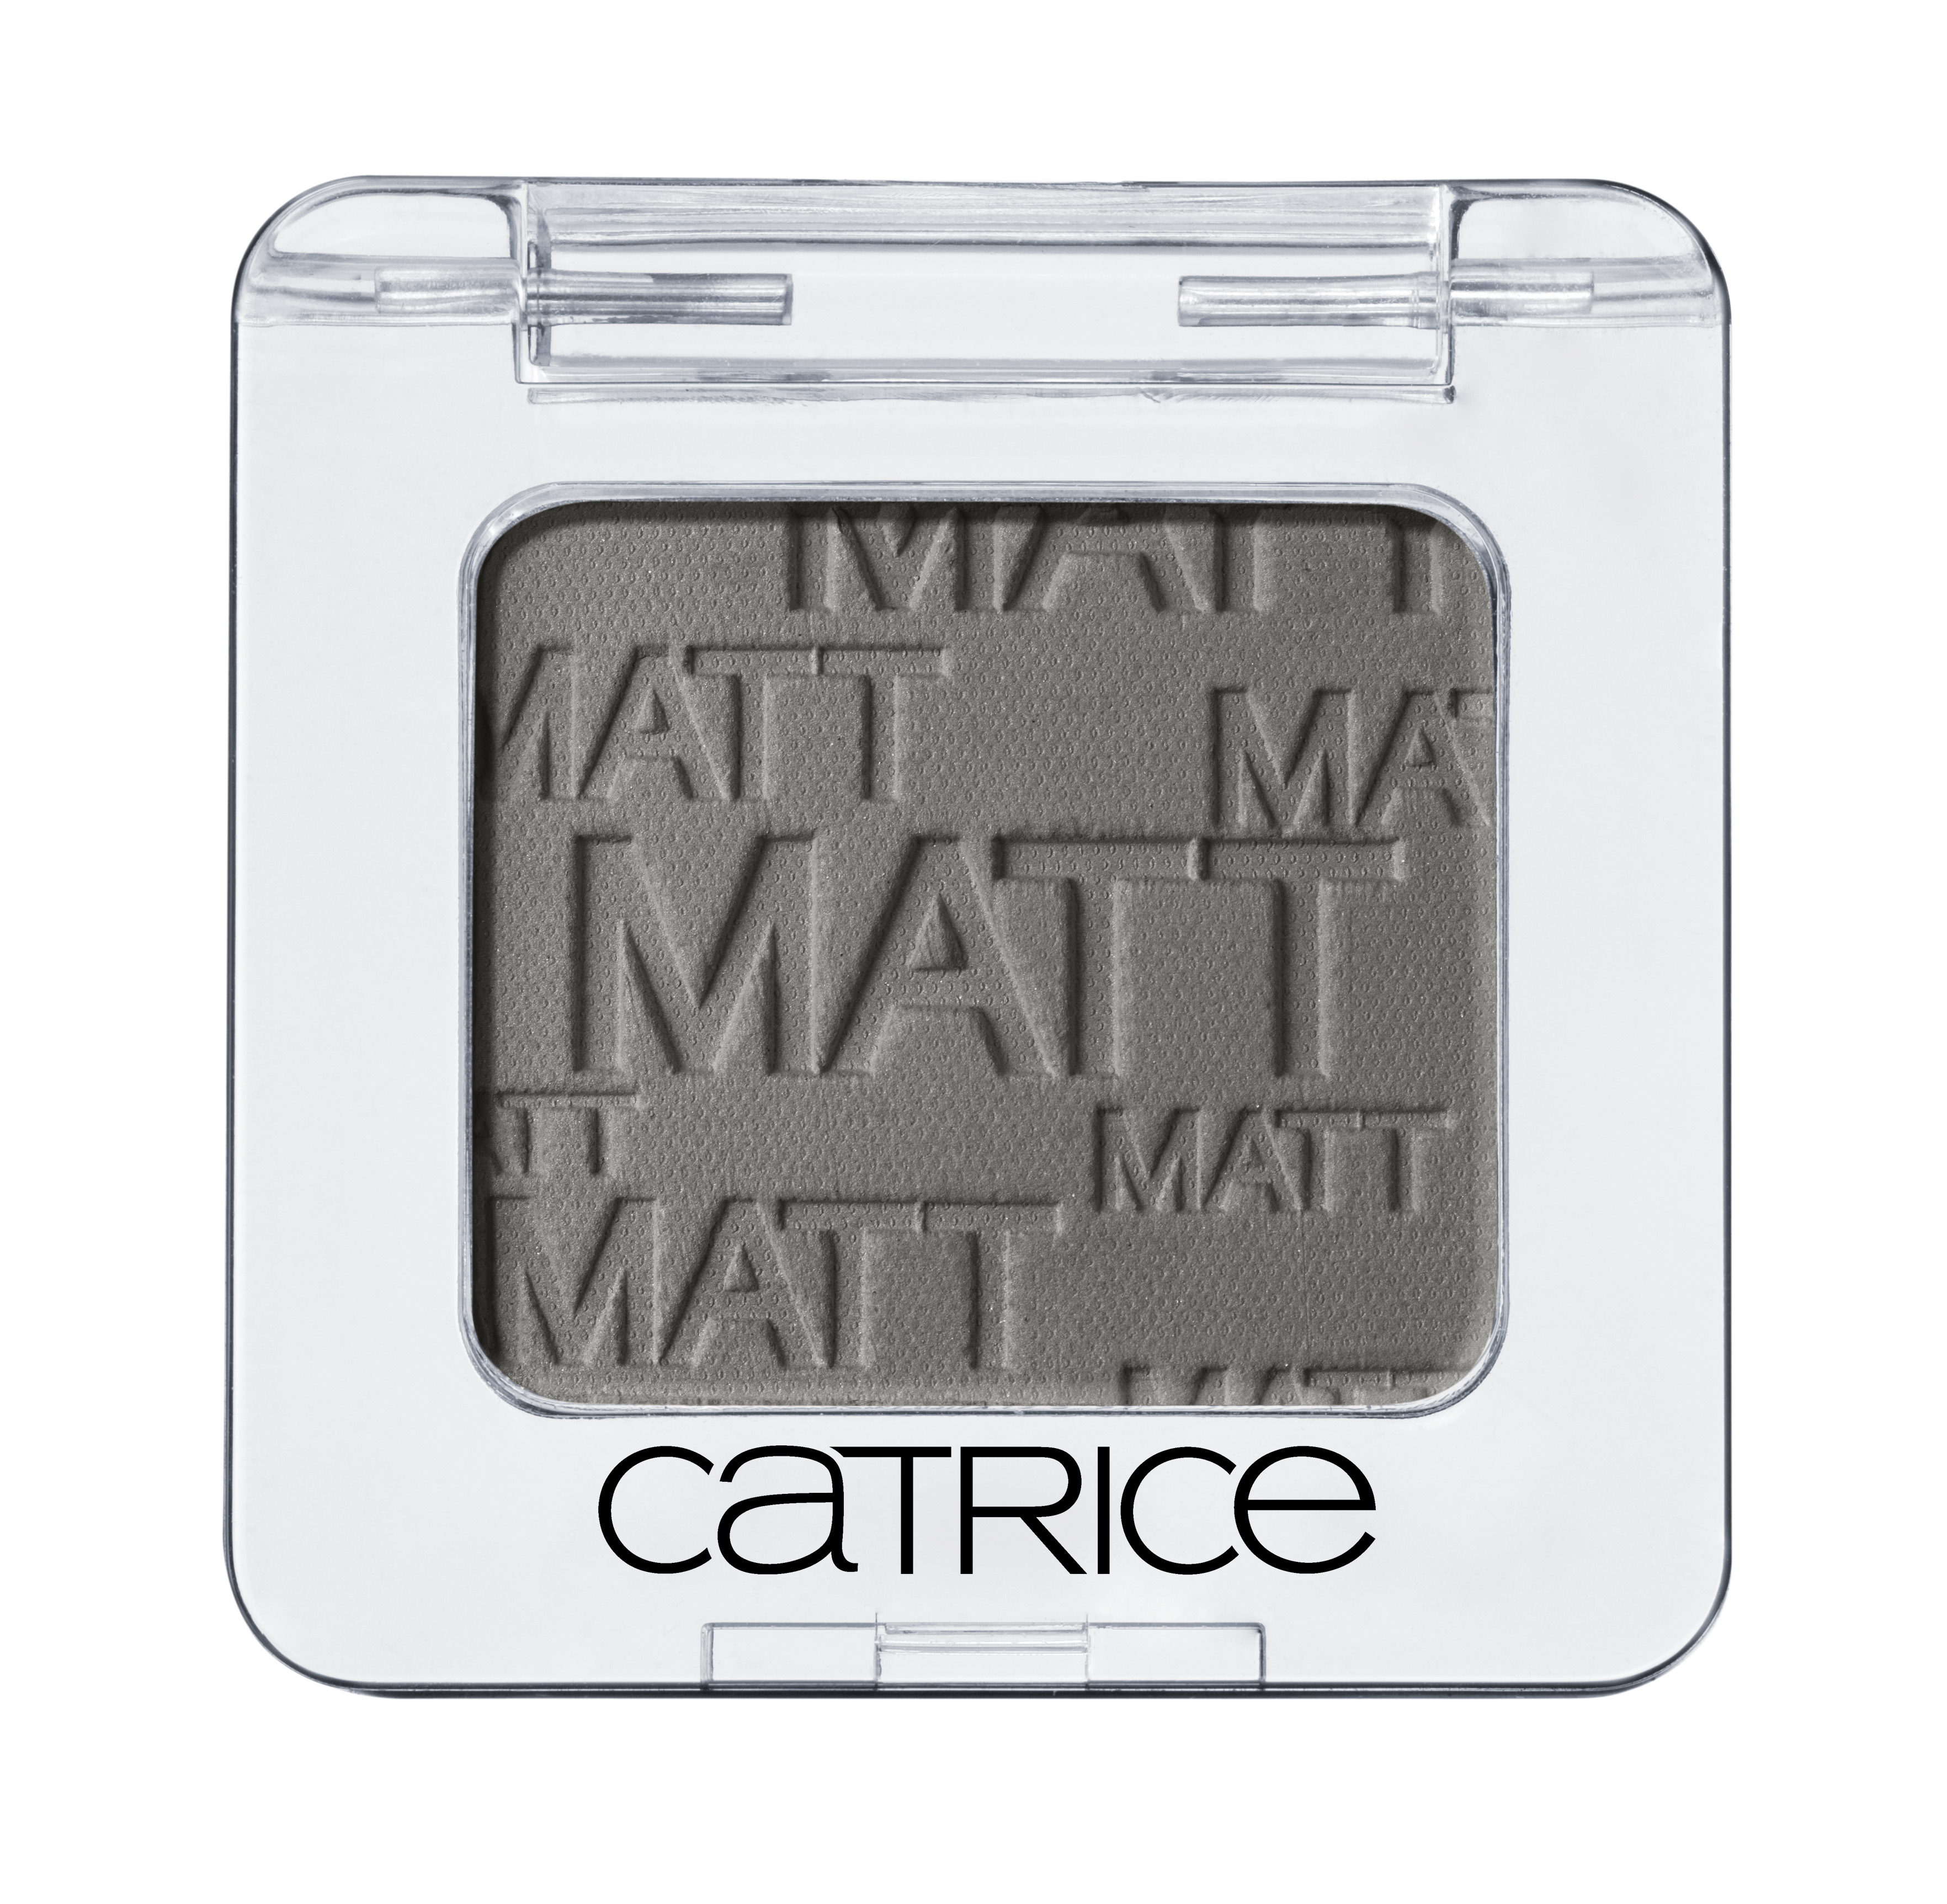 Catrice Absolute Eye Colour 920